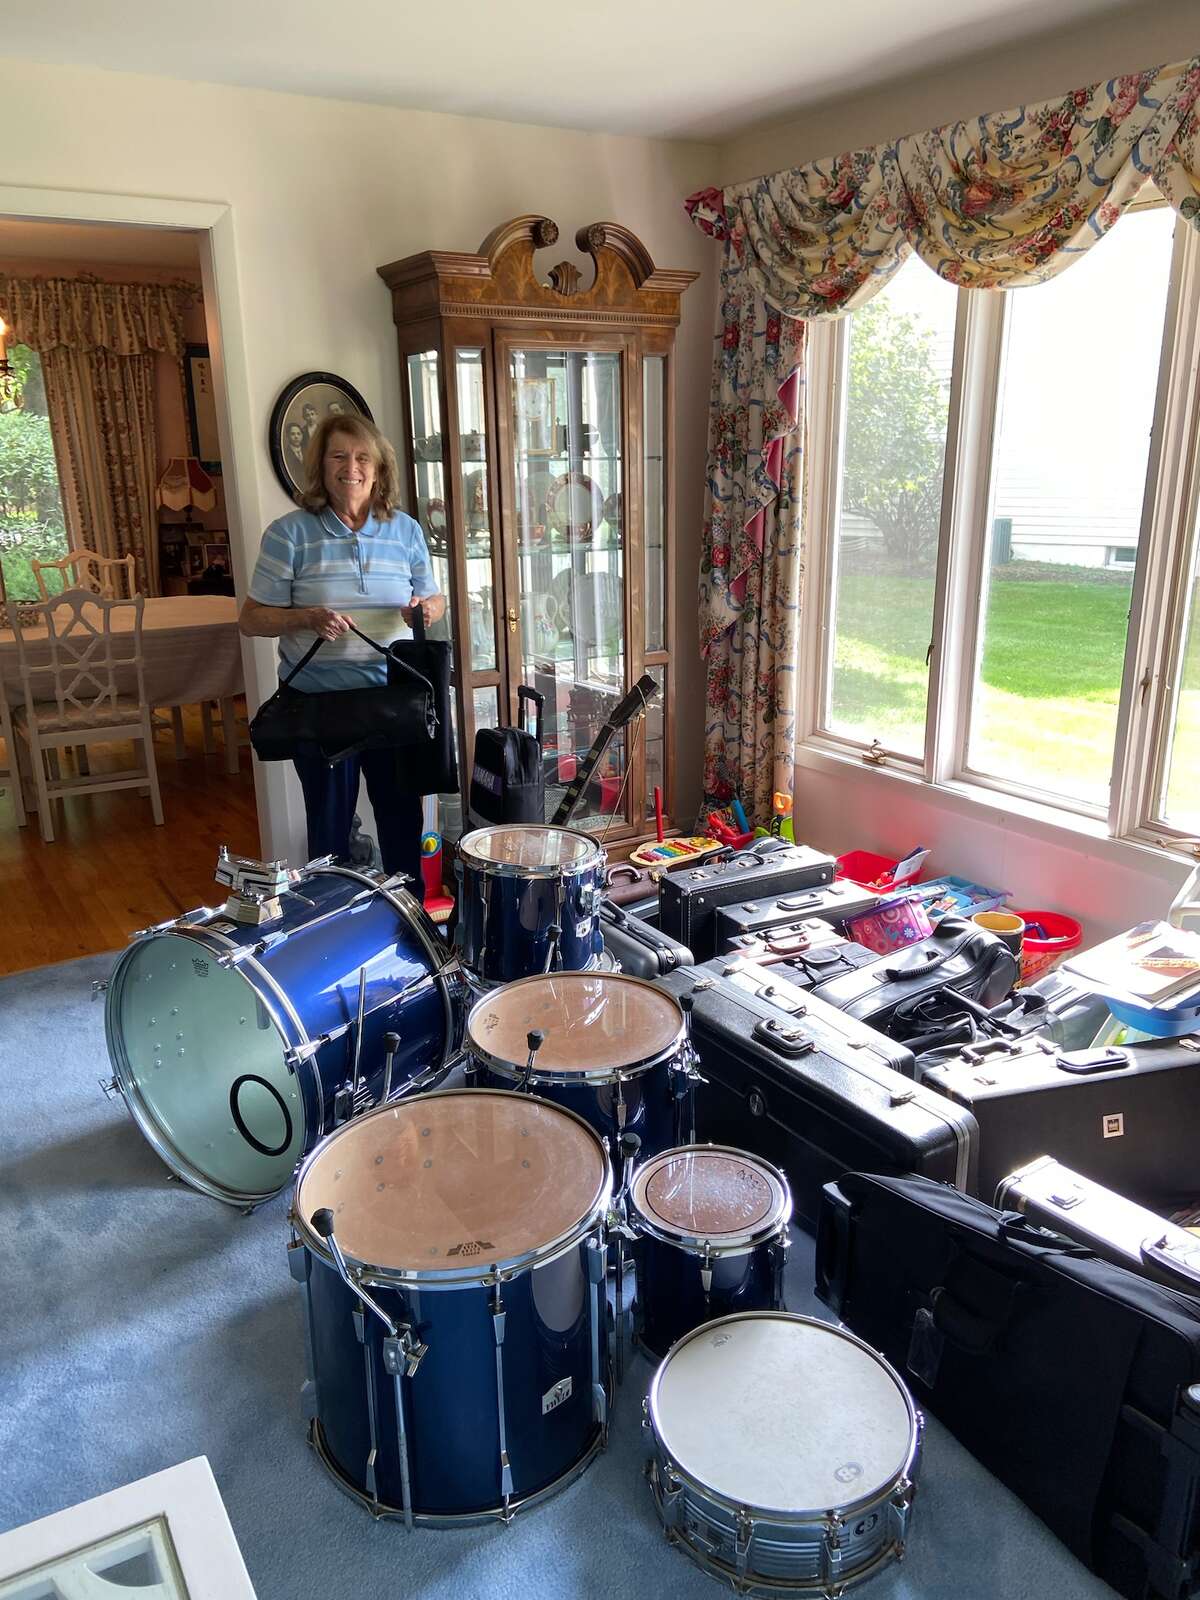 Jill Rifkin, who is in charge of Instruments for Students, stands in her living room surrounded by donations. Last fall, the program began partnering with local organizations for weekend drives to collect musical instruments for underprivileged students across the Capital Region. (Courtesy of Jill Rifkin)